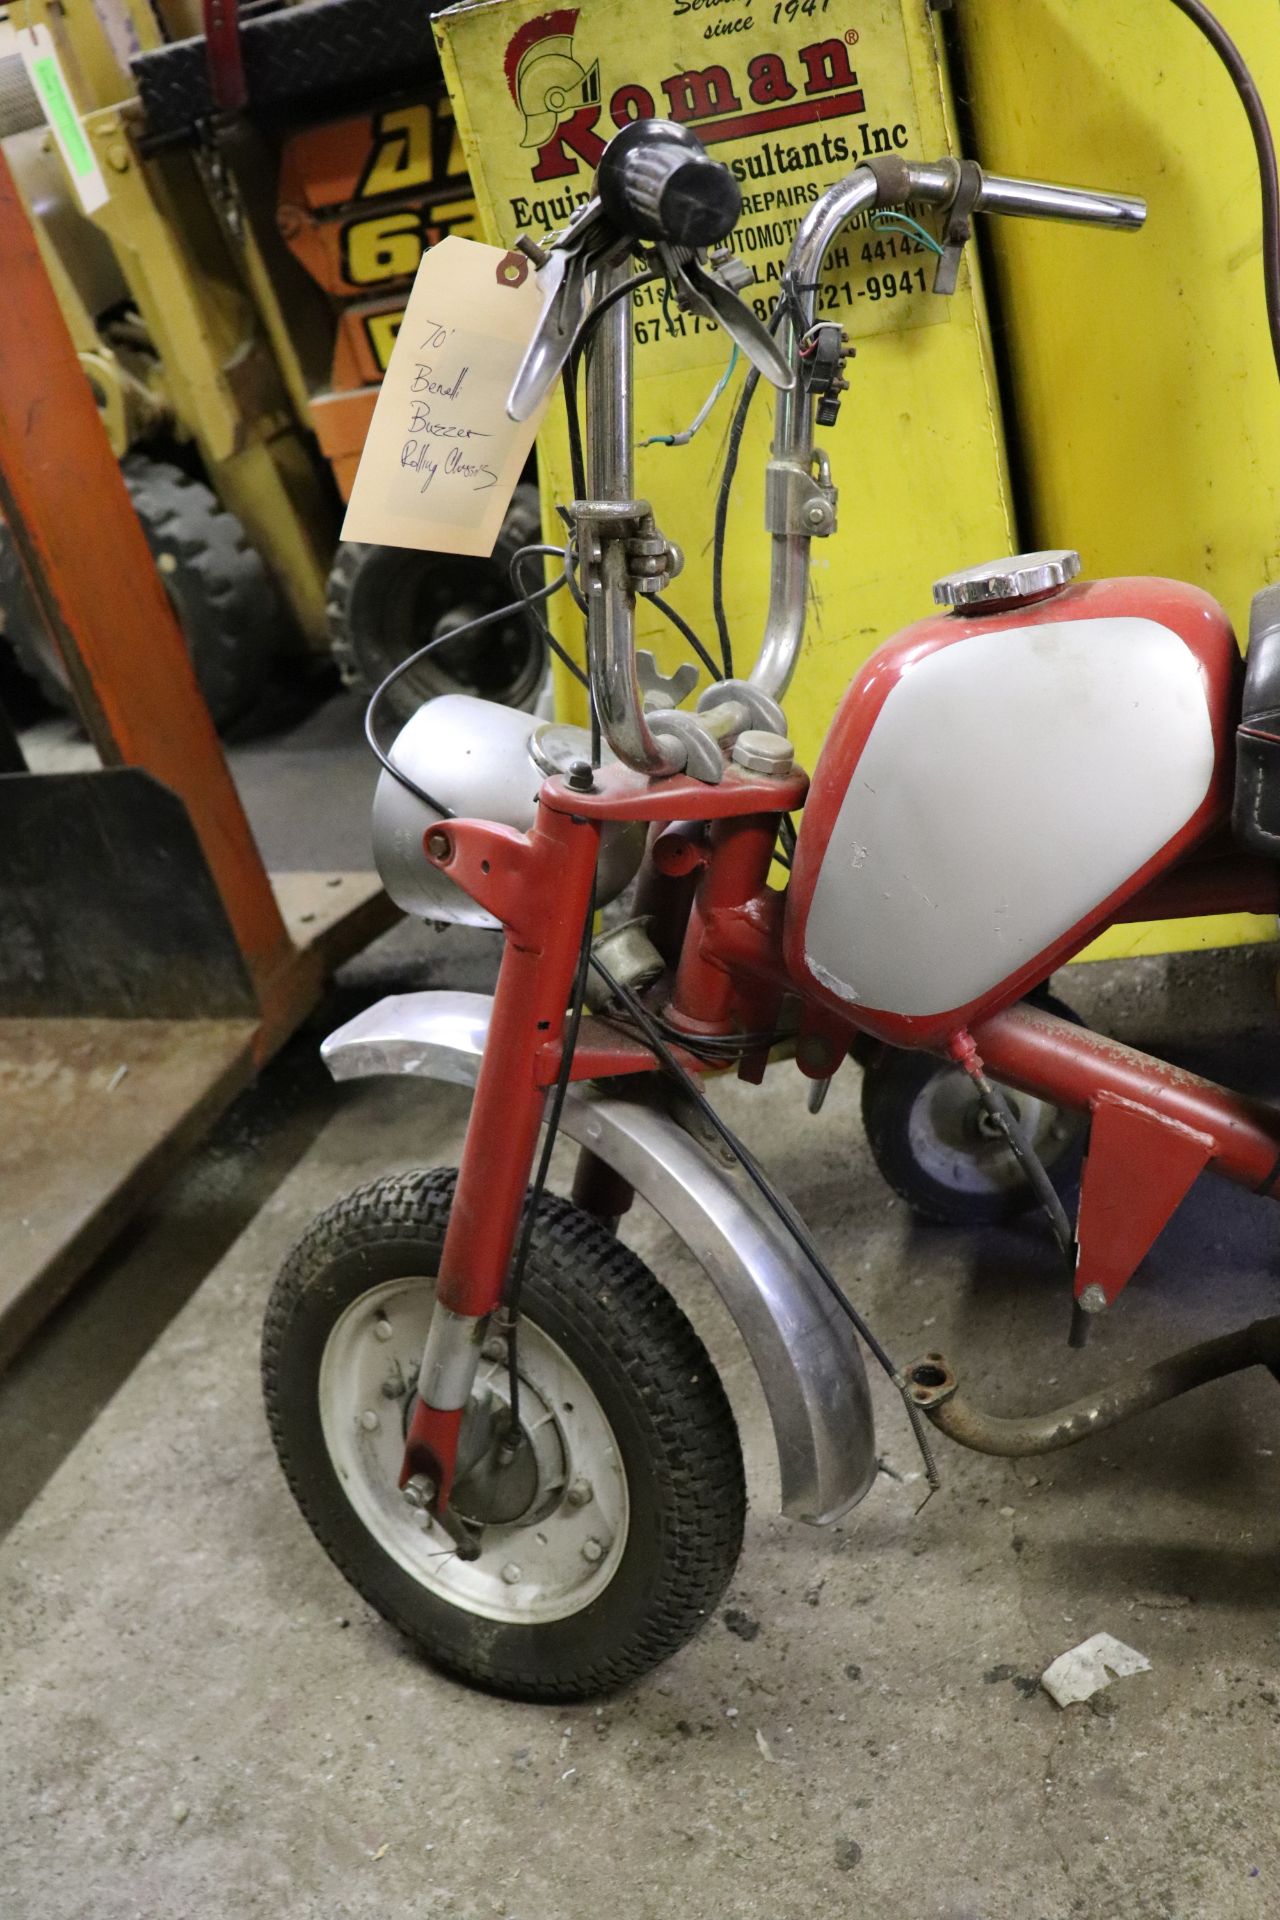 1970 Benelli Buzzer, rolling chassis, 1,262 miles, serial #537684 MINI BIKES MARKED AS PARTS BIKES, - Image 3 of 7